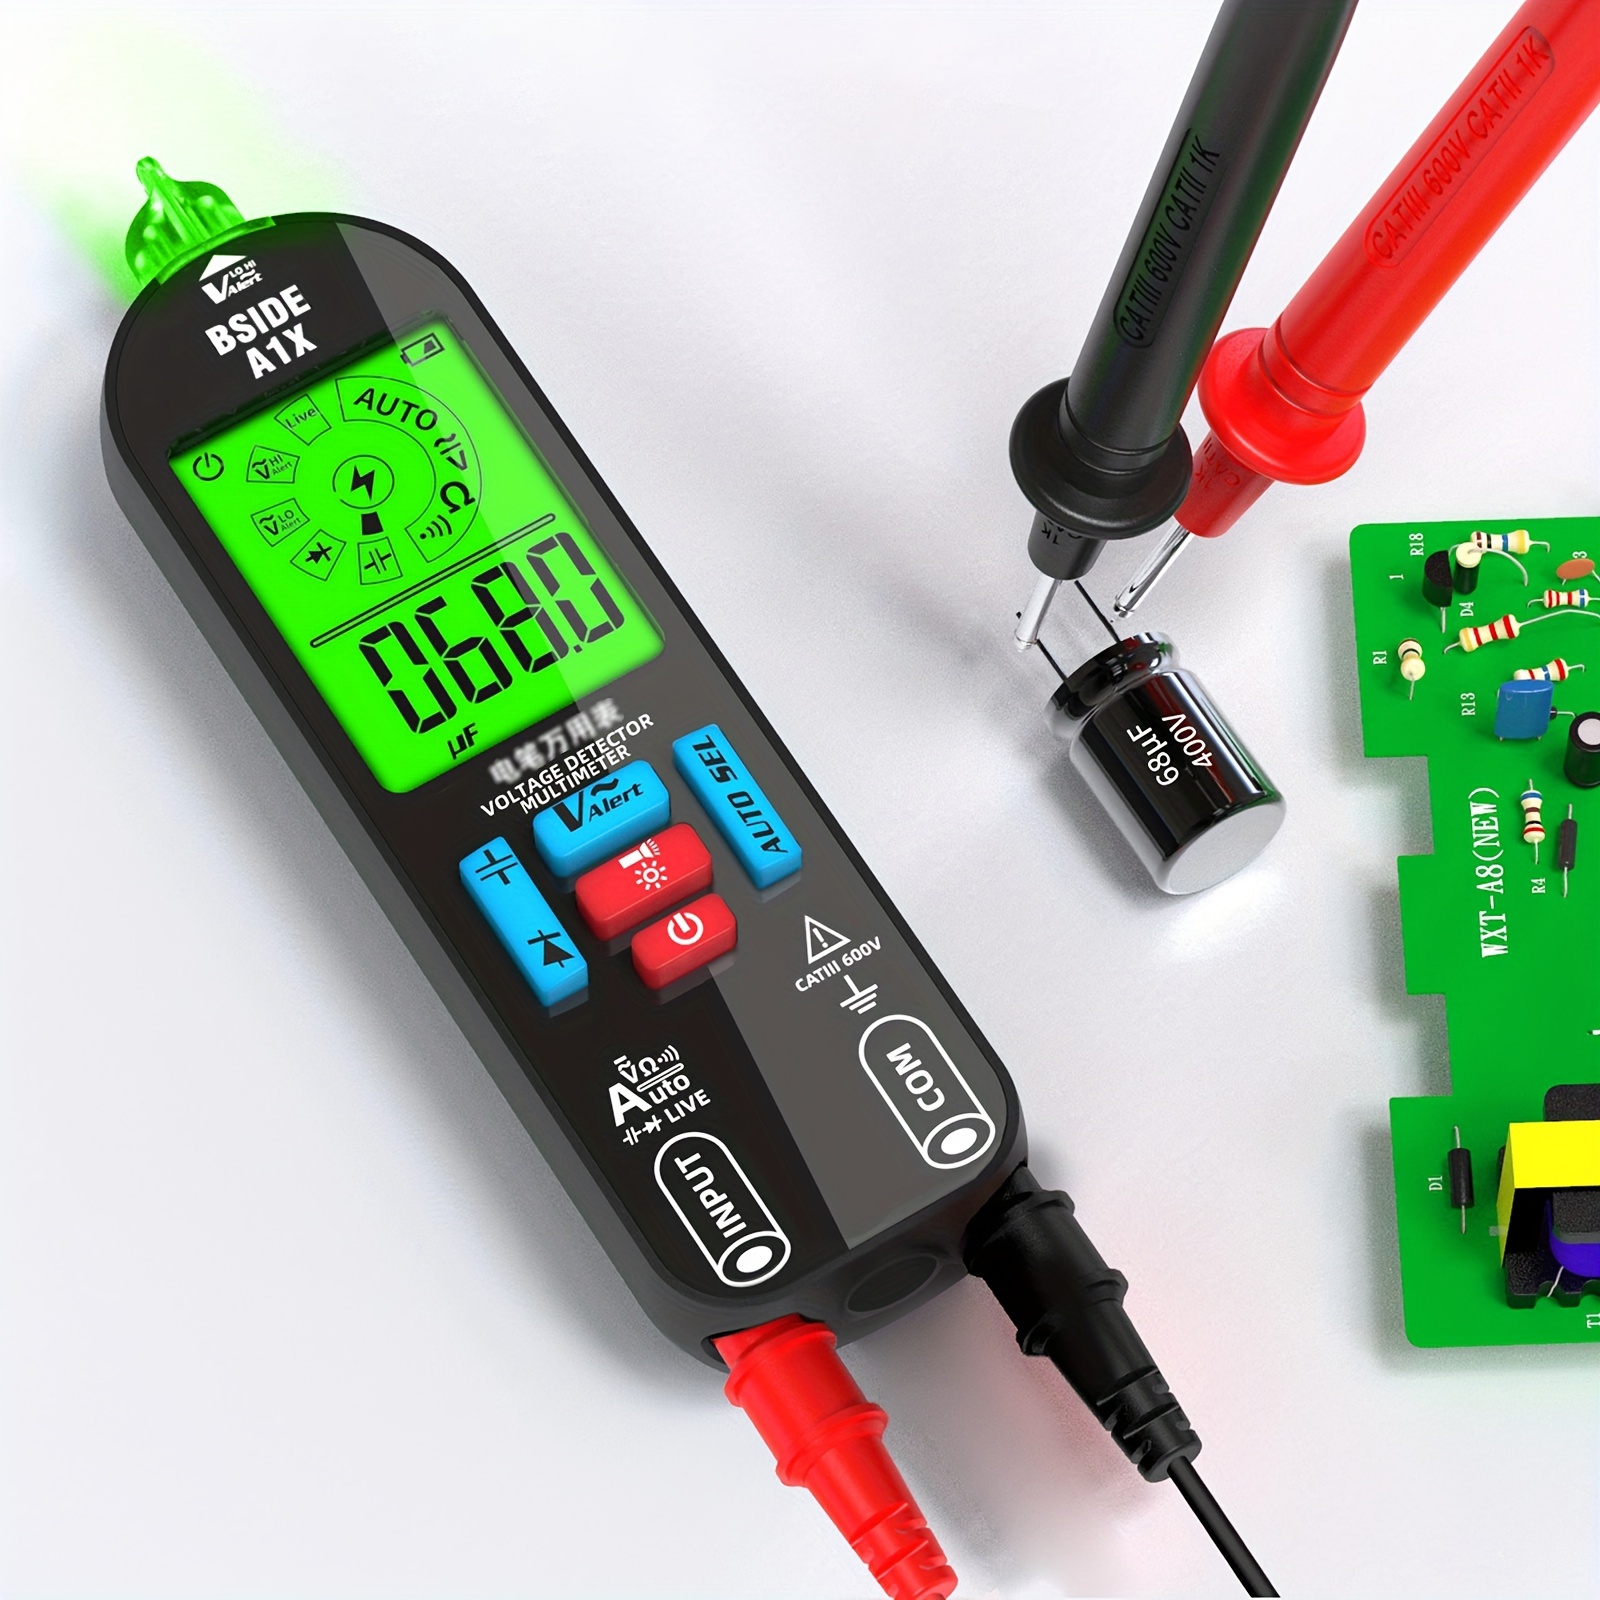 

Bside A1x For Smart Digital Multimeter - Rechargeable, High-resolution Lcd Display With Colorful Backlight, Auto-testing For Voltage, Resistance, Continuity & More